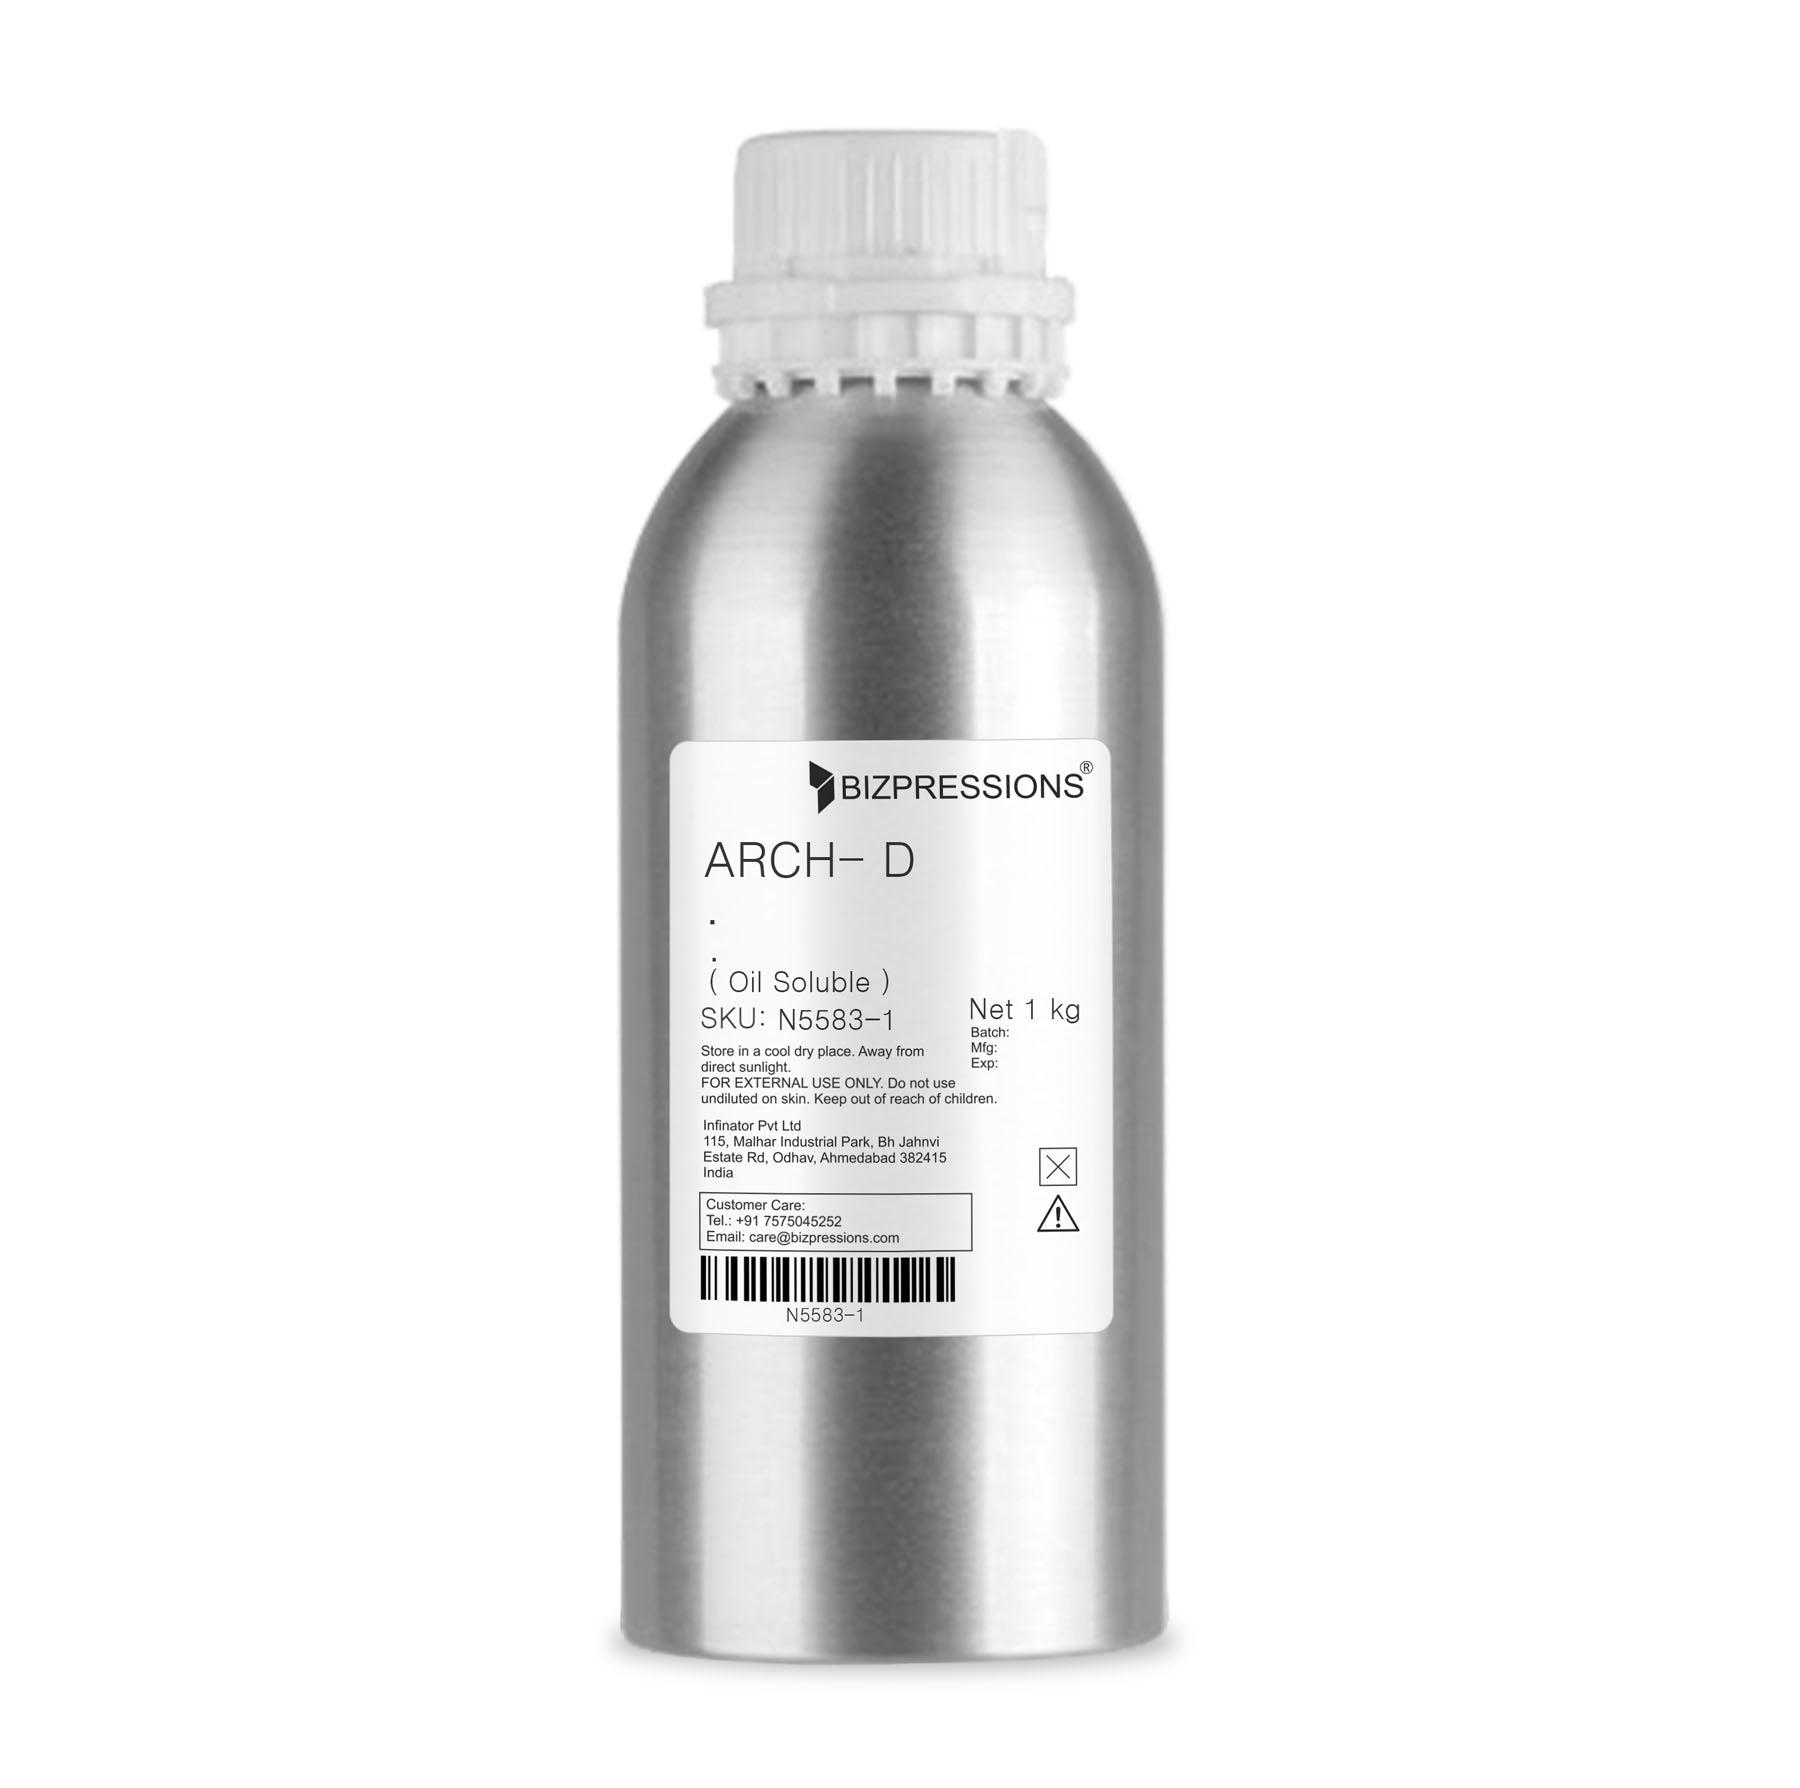 ARCH- D - Fragrance ( Oil Soluble ) - 1 kg